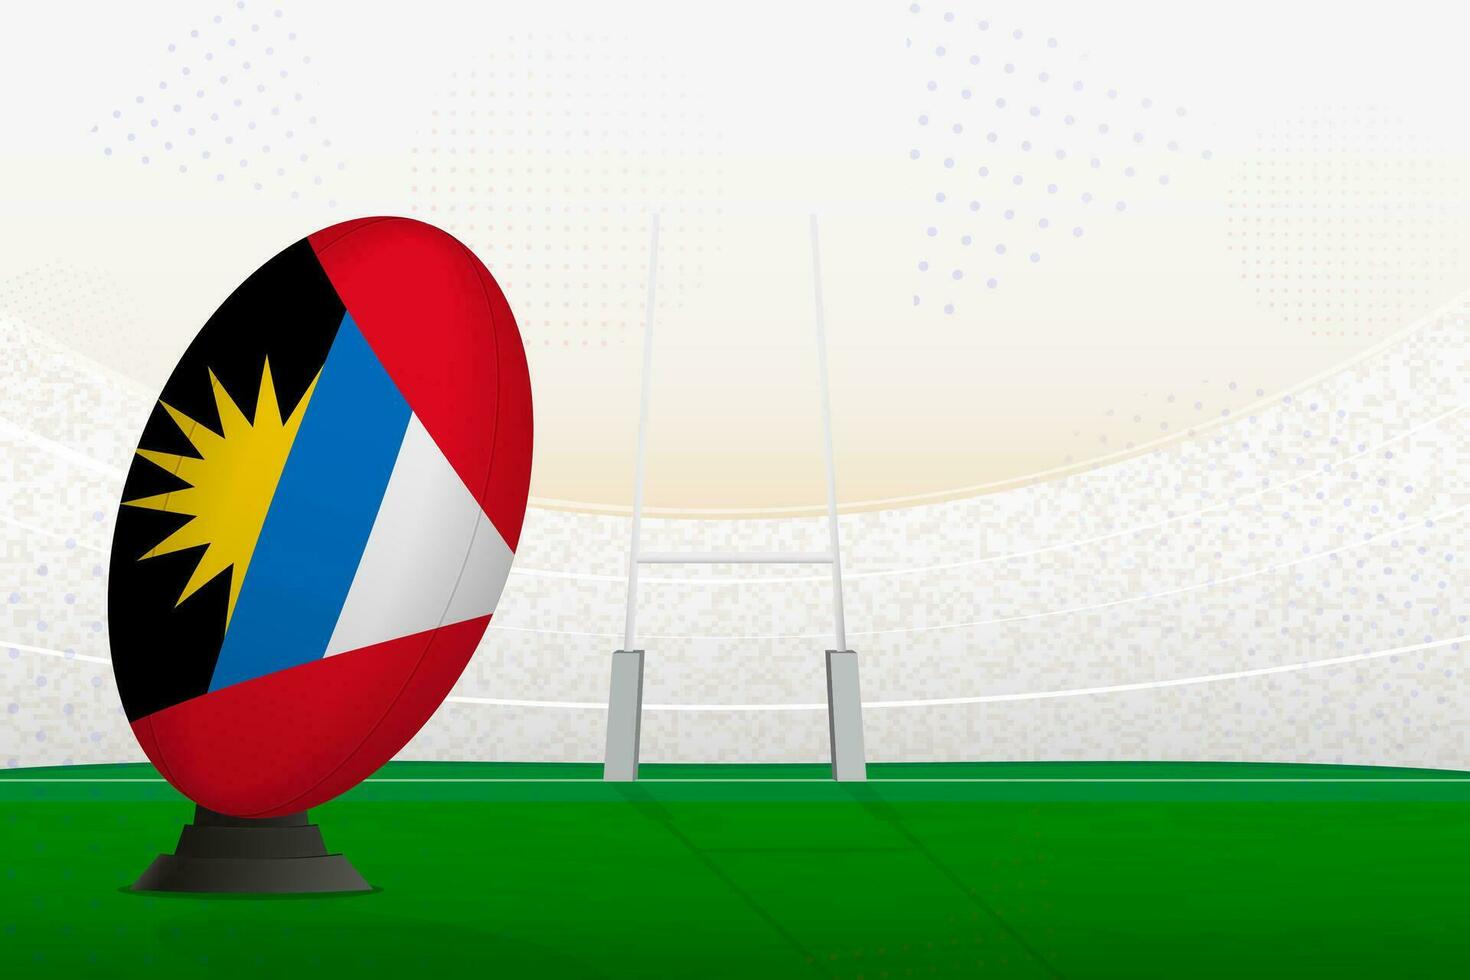 Antigua and Barbuda national team rugby ball on rugby stadium and goal posts, preparing for a penalty or free kick. vector